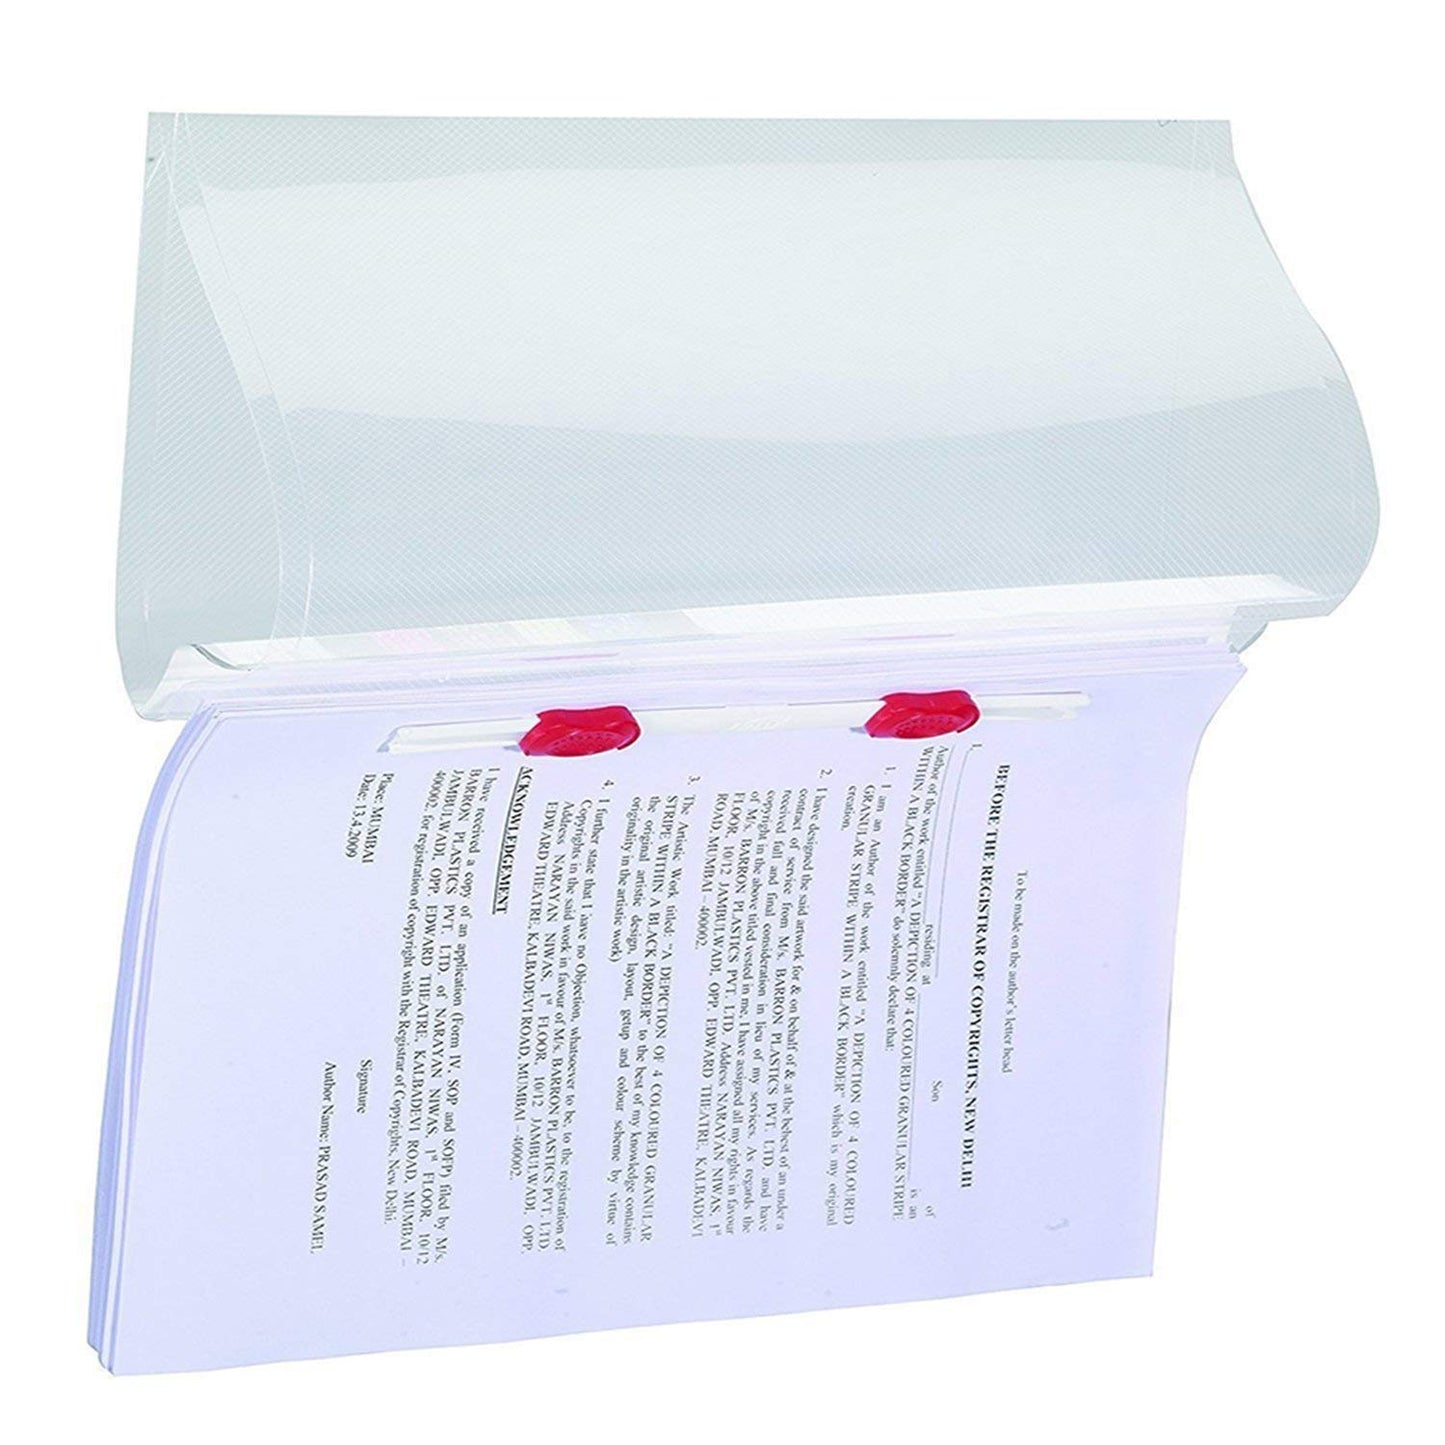 KIYA ® A4 Size Transparent Report File Folder Heavy with Plastic Clip for Certificates, Office Documents, Reports, Page Holder, Presentation | Pack of 1 Pieces (Transparent)